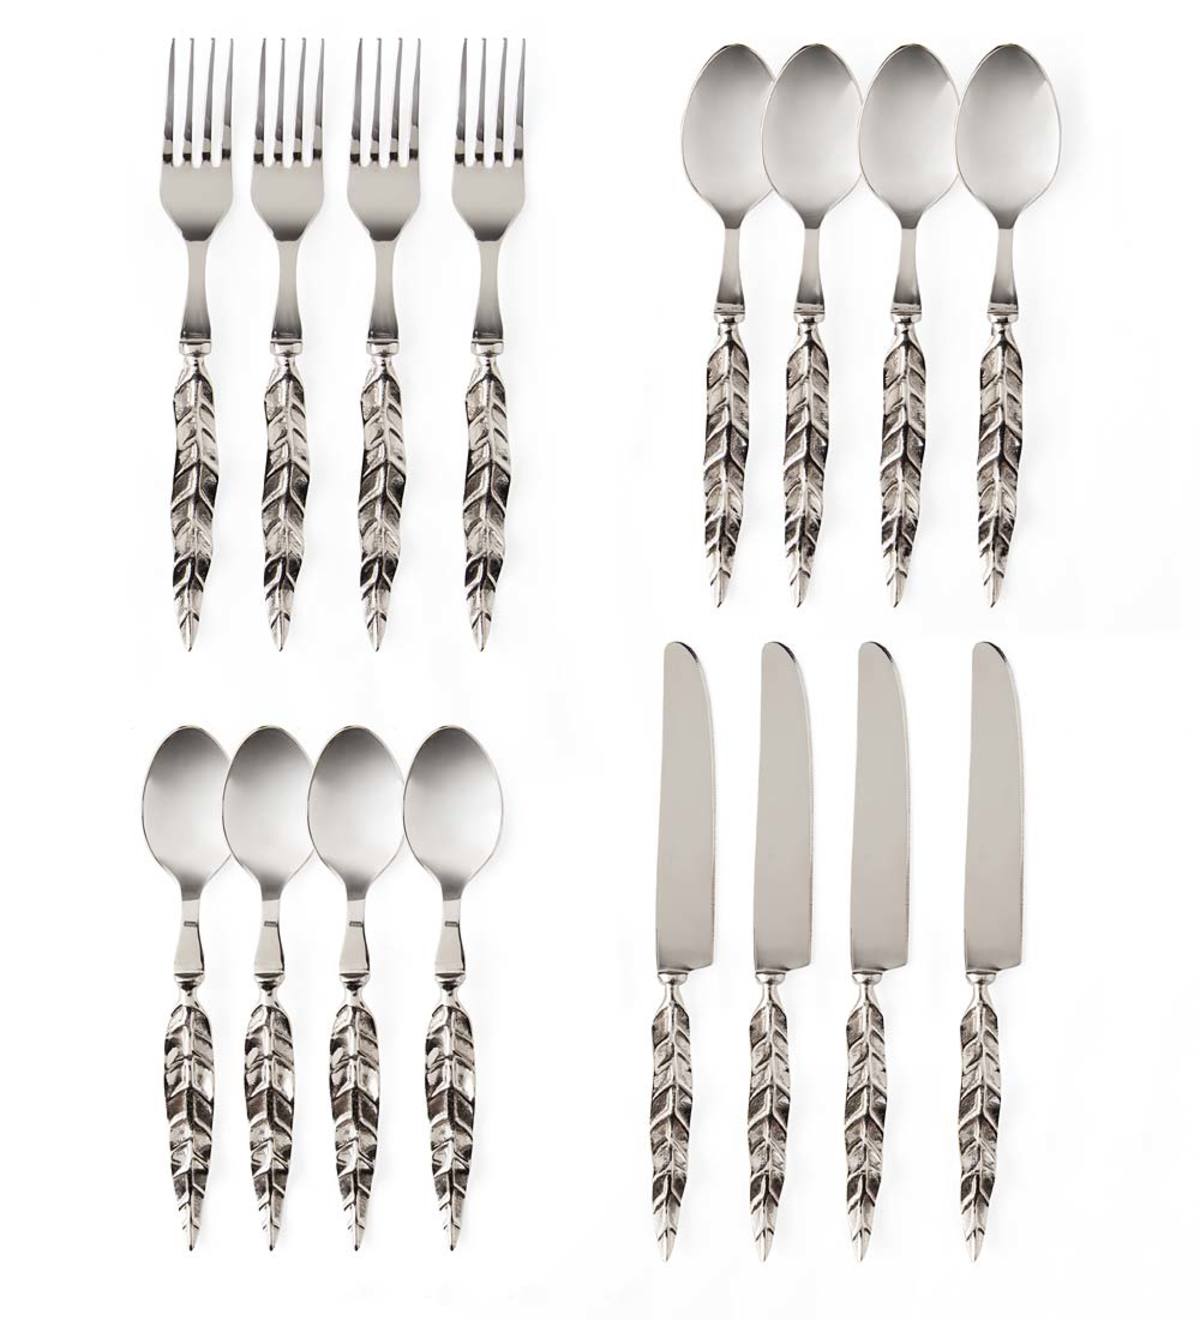 Stainless Steel Feather Flatware Set - 16 Pieces